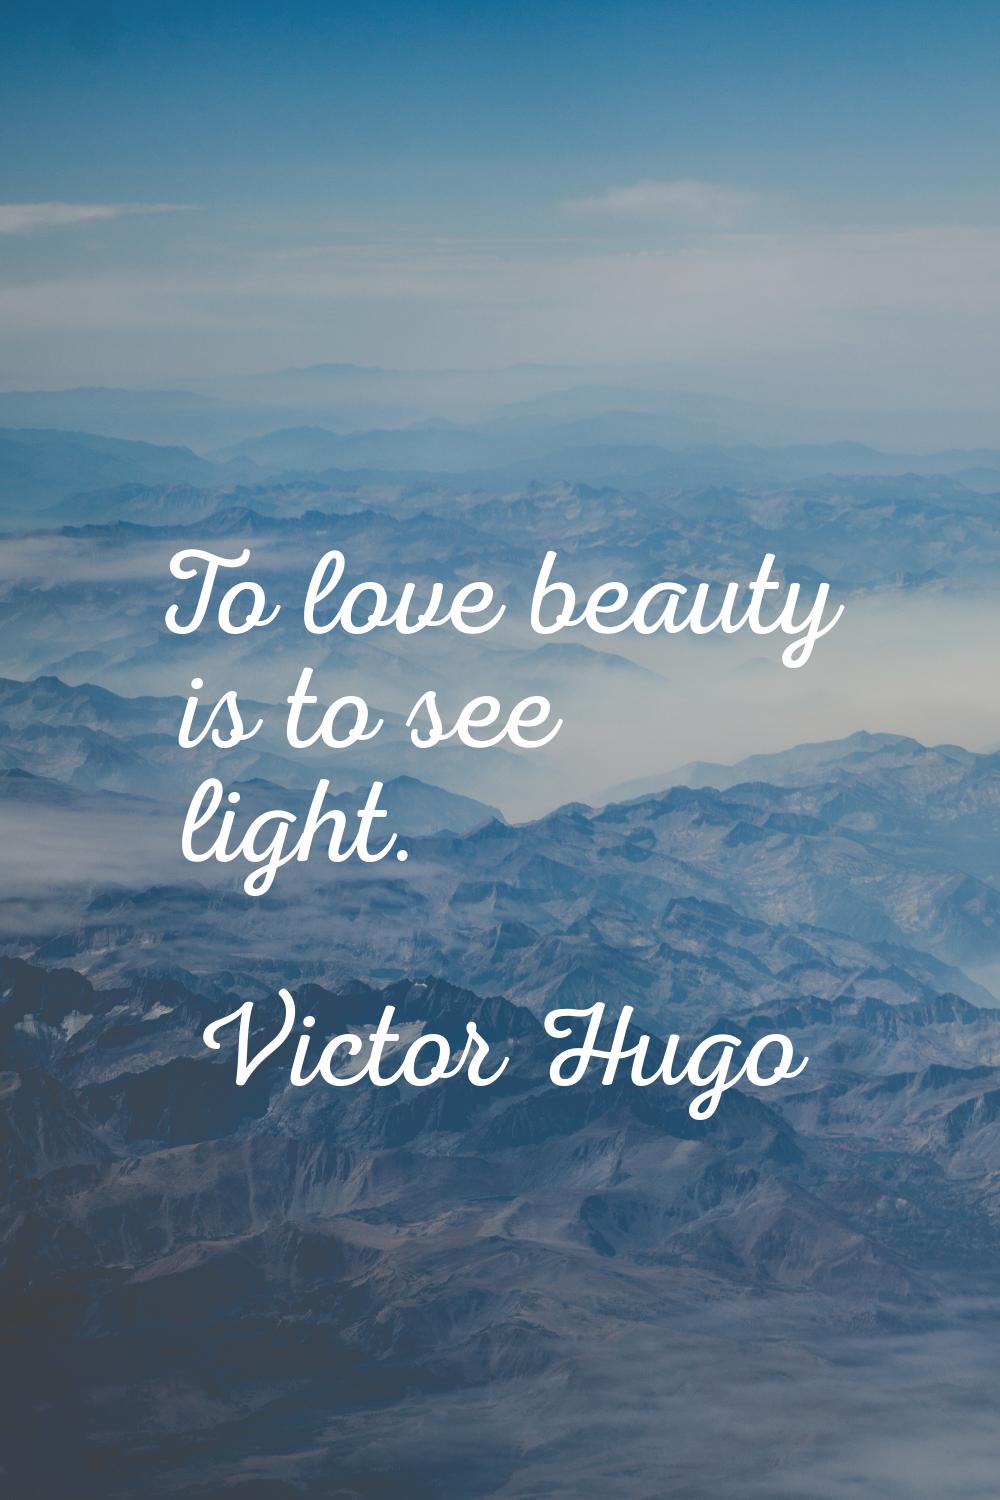 To love beauty is to see light.